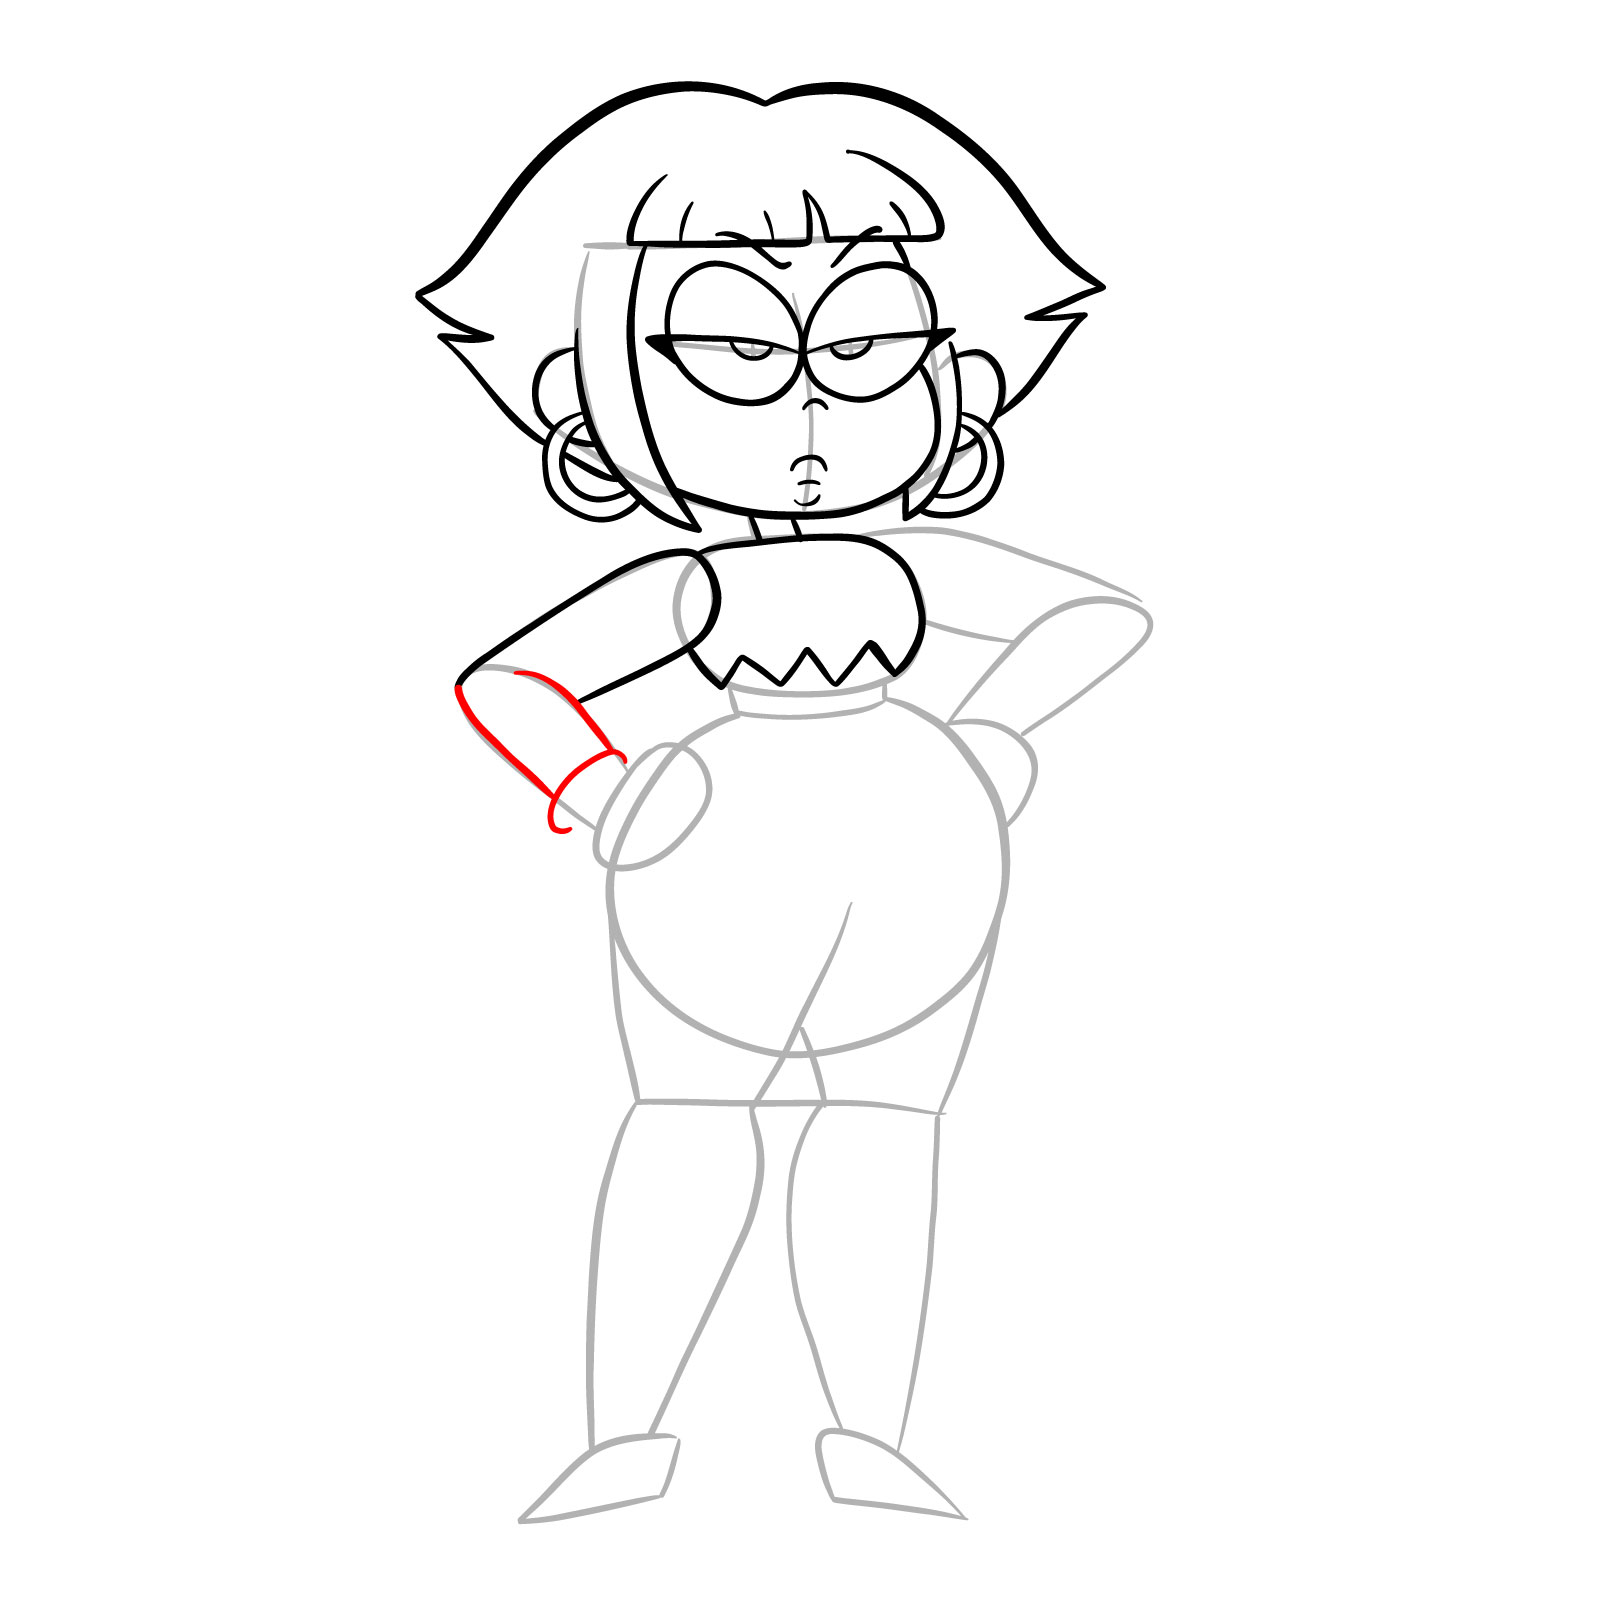 How to draw Human Shannon from OK K.O.! - step 17